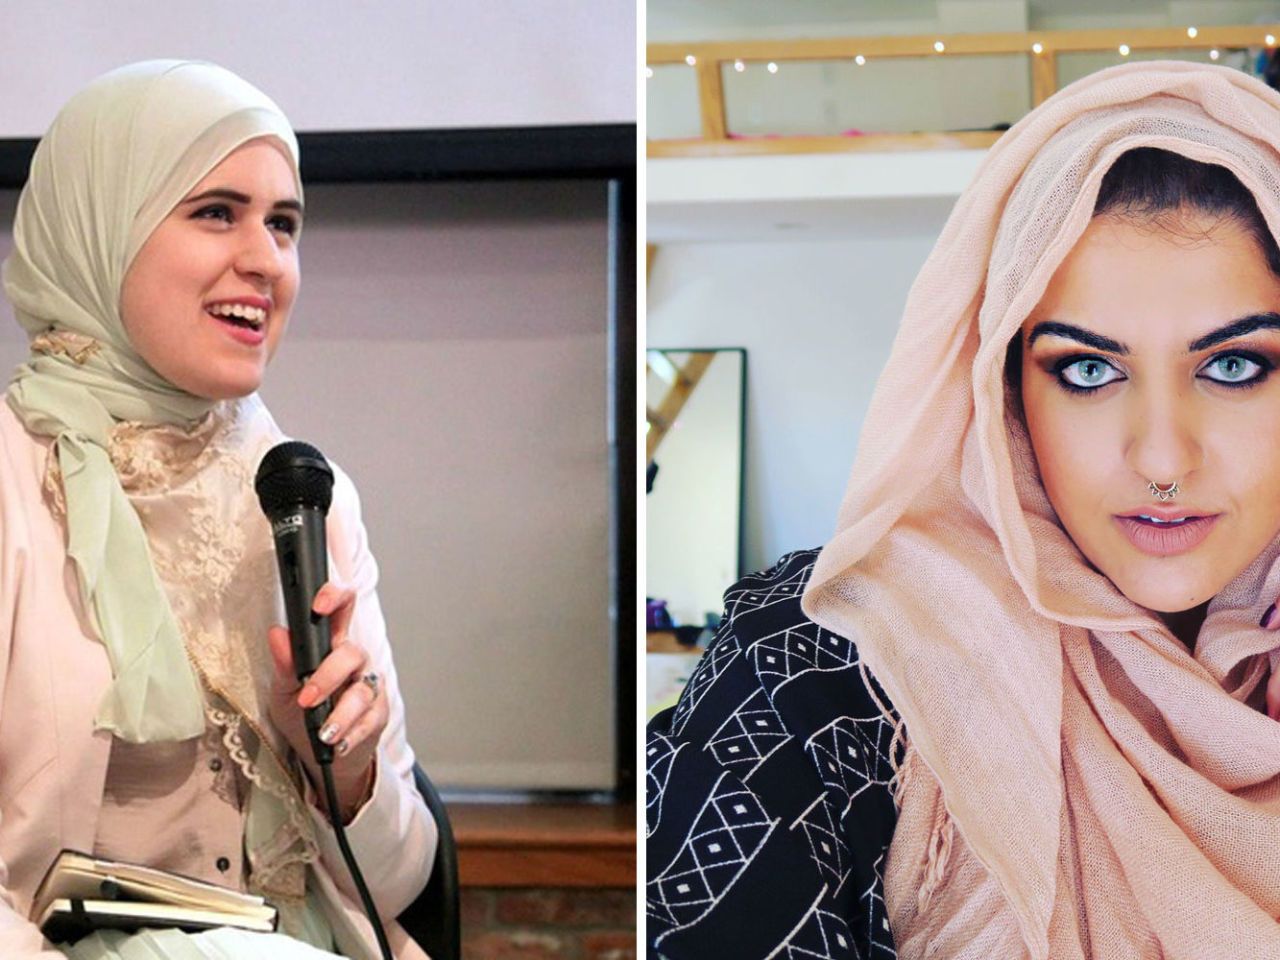 These Twentysomething Muslim Women Are Clapping Back Against Stereotypes image